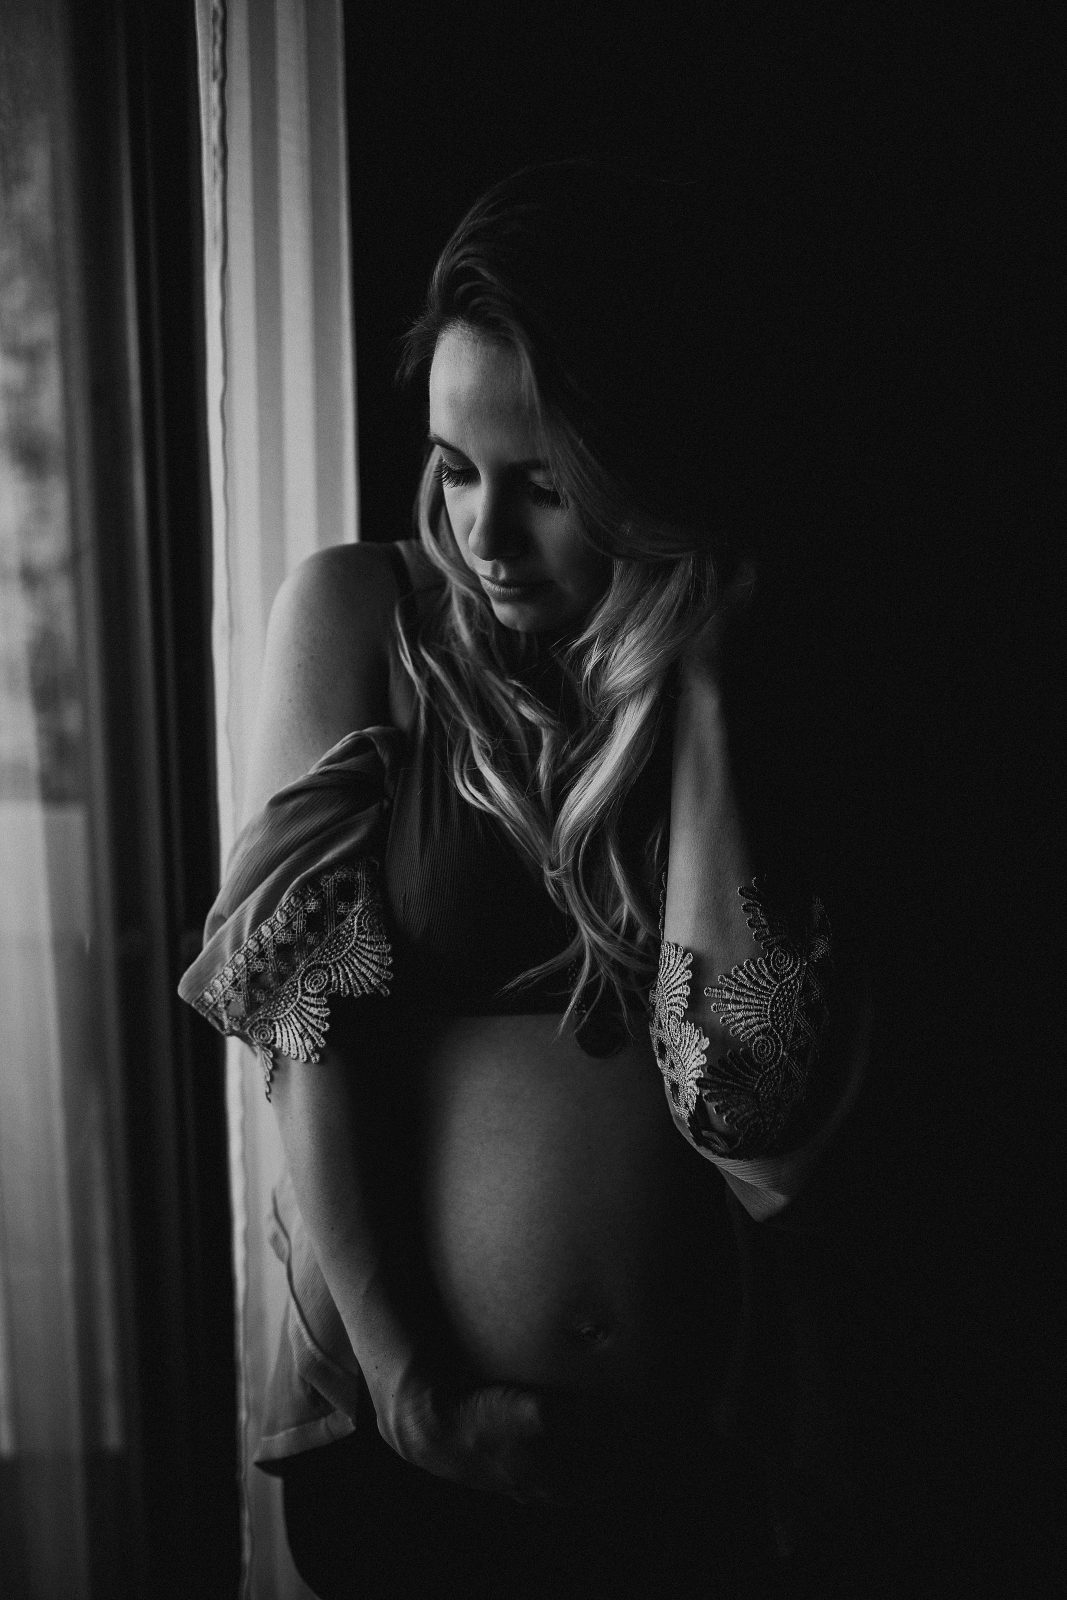 edmonton maternity photographer in home maternity session with cute couple